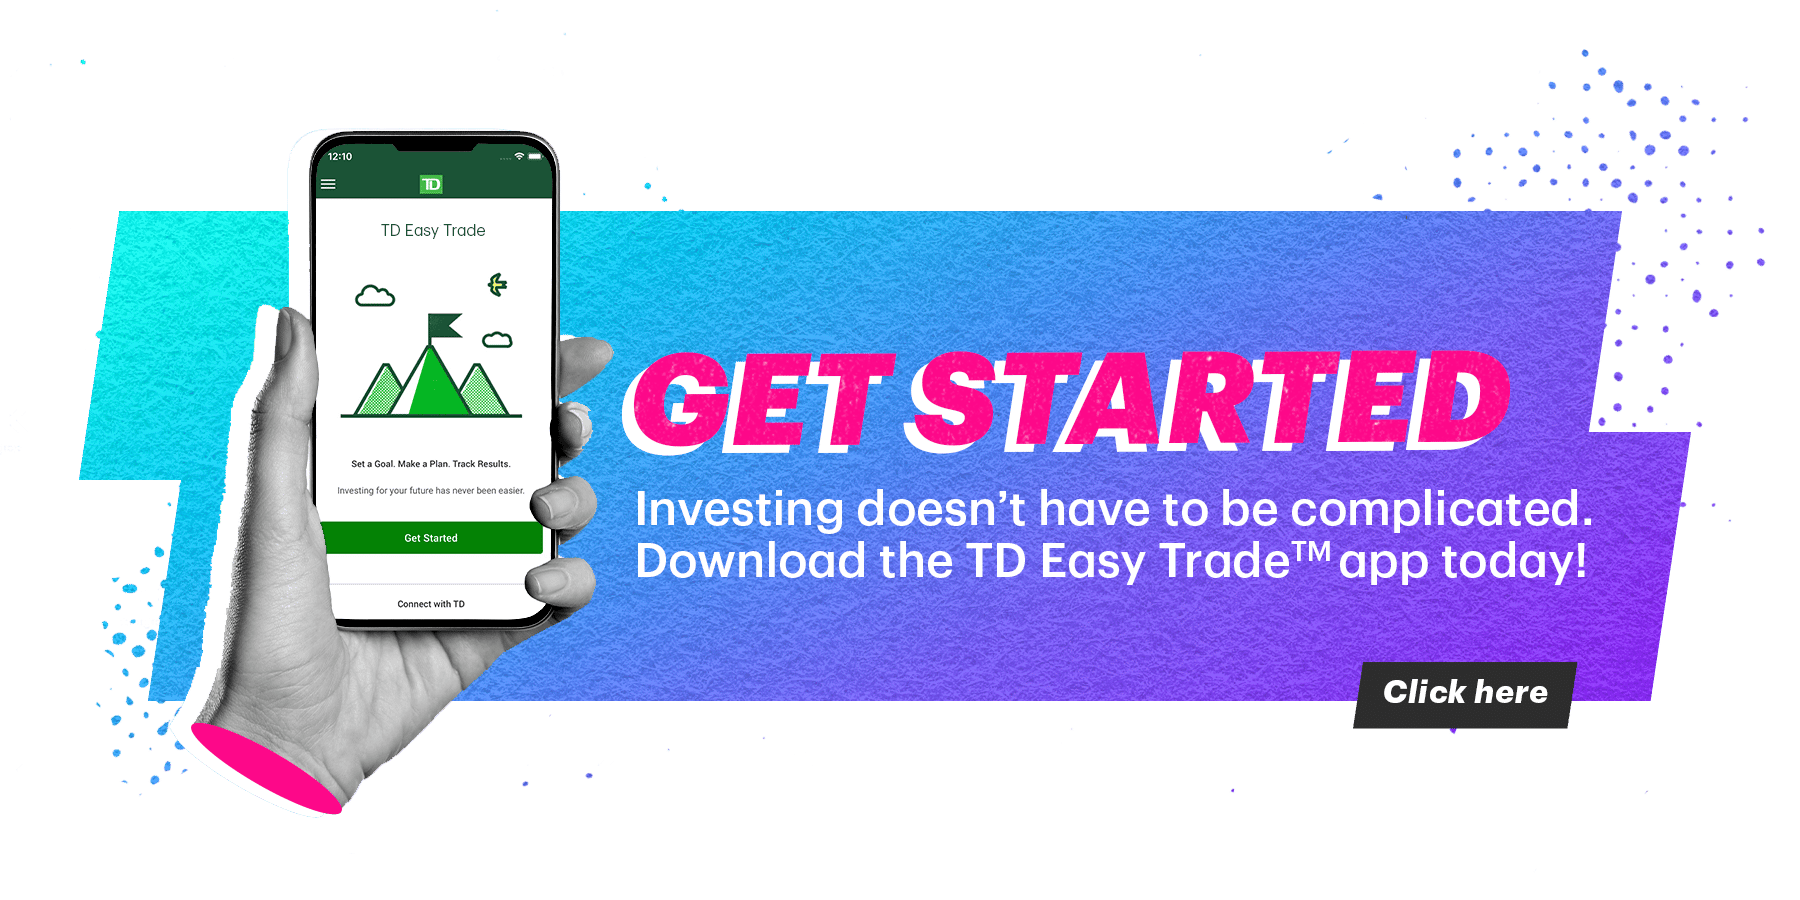 Get started. Investing doesn't have to be complicated. Download the TD Easy Trade app today! Click here